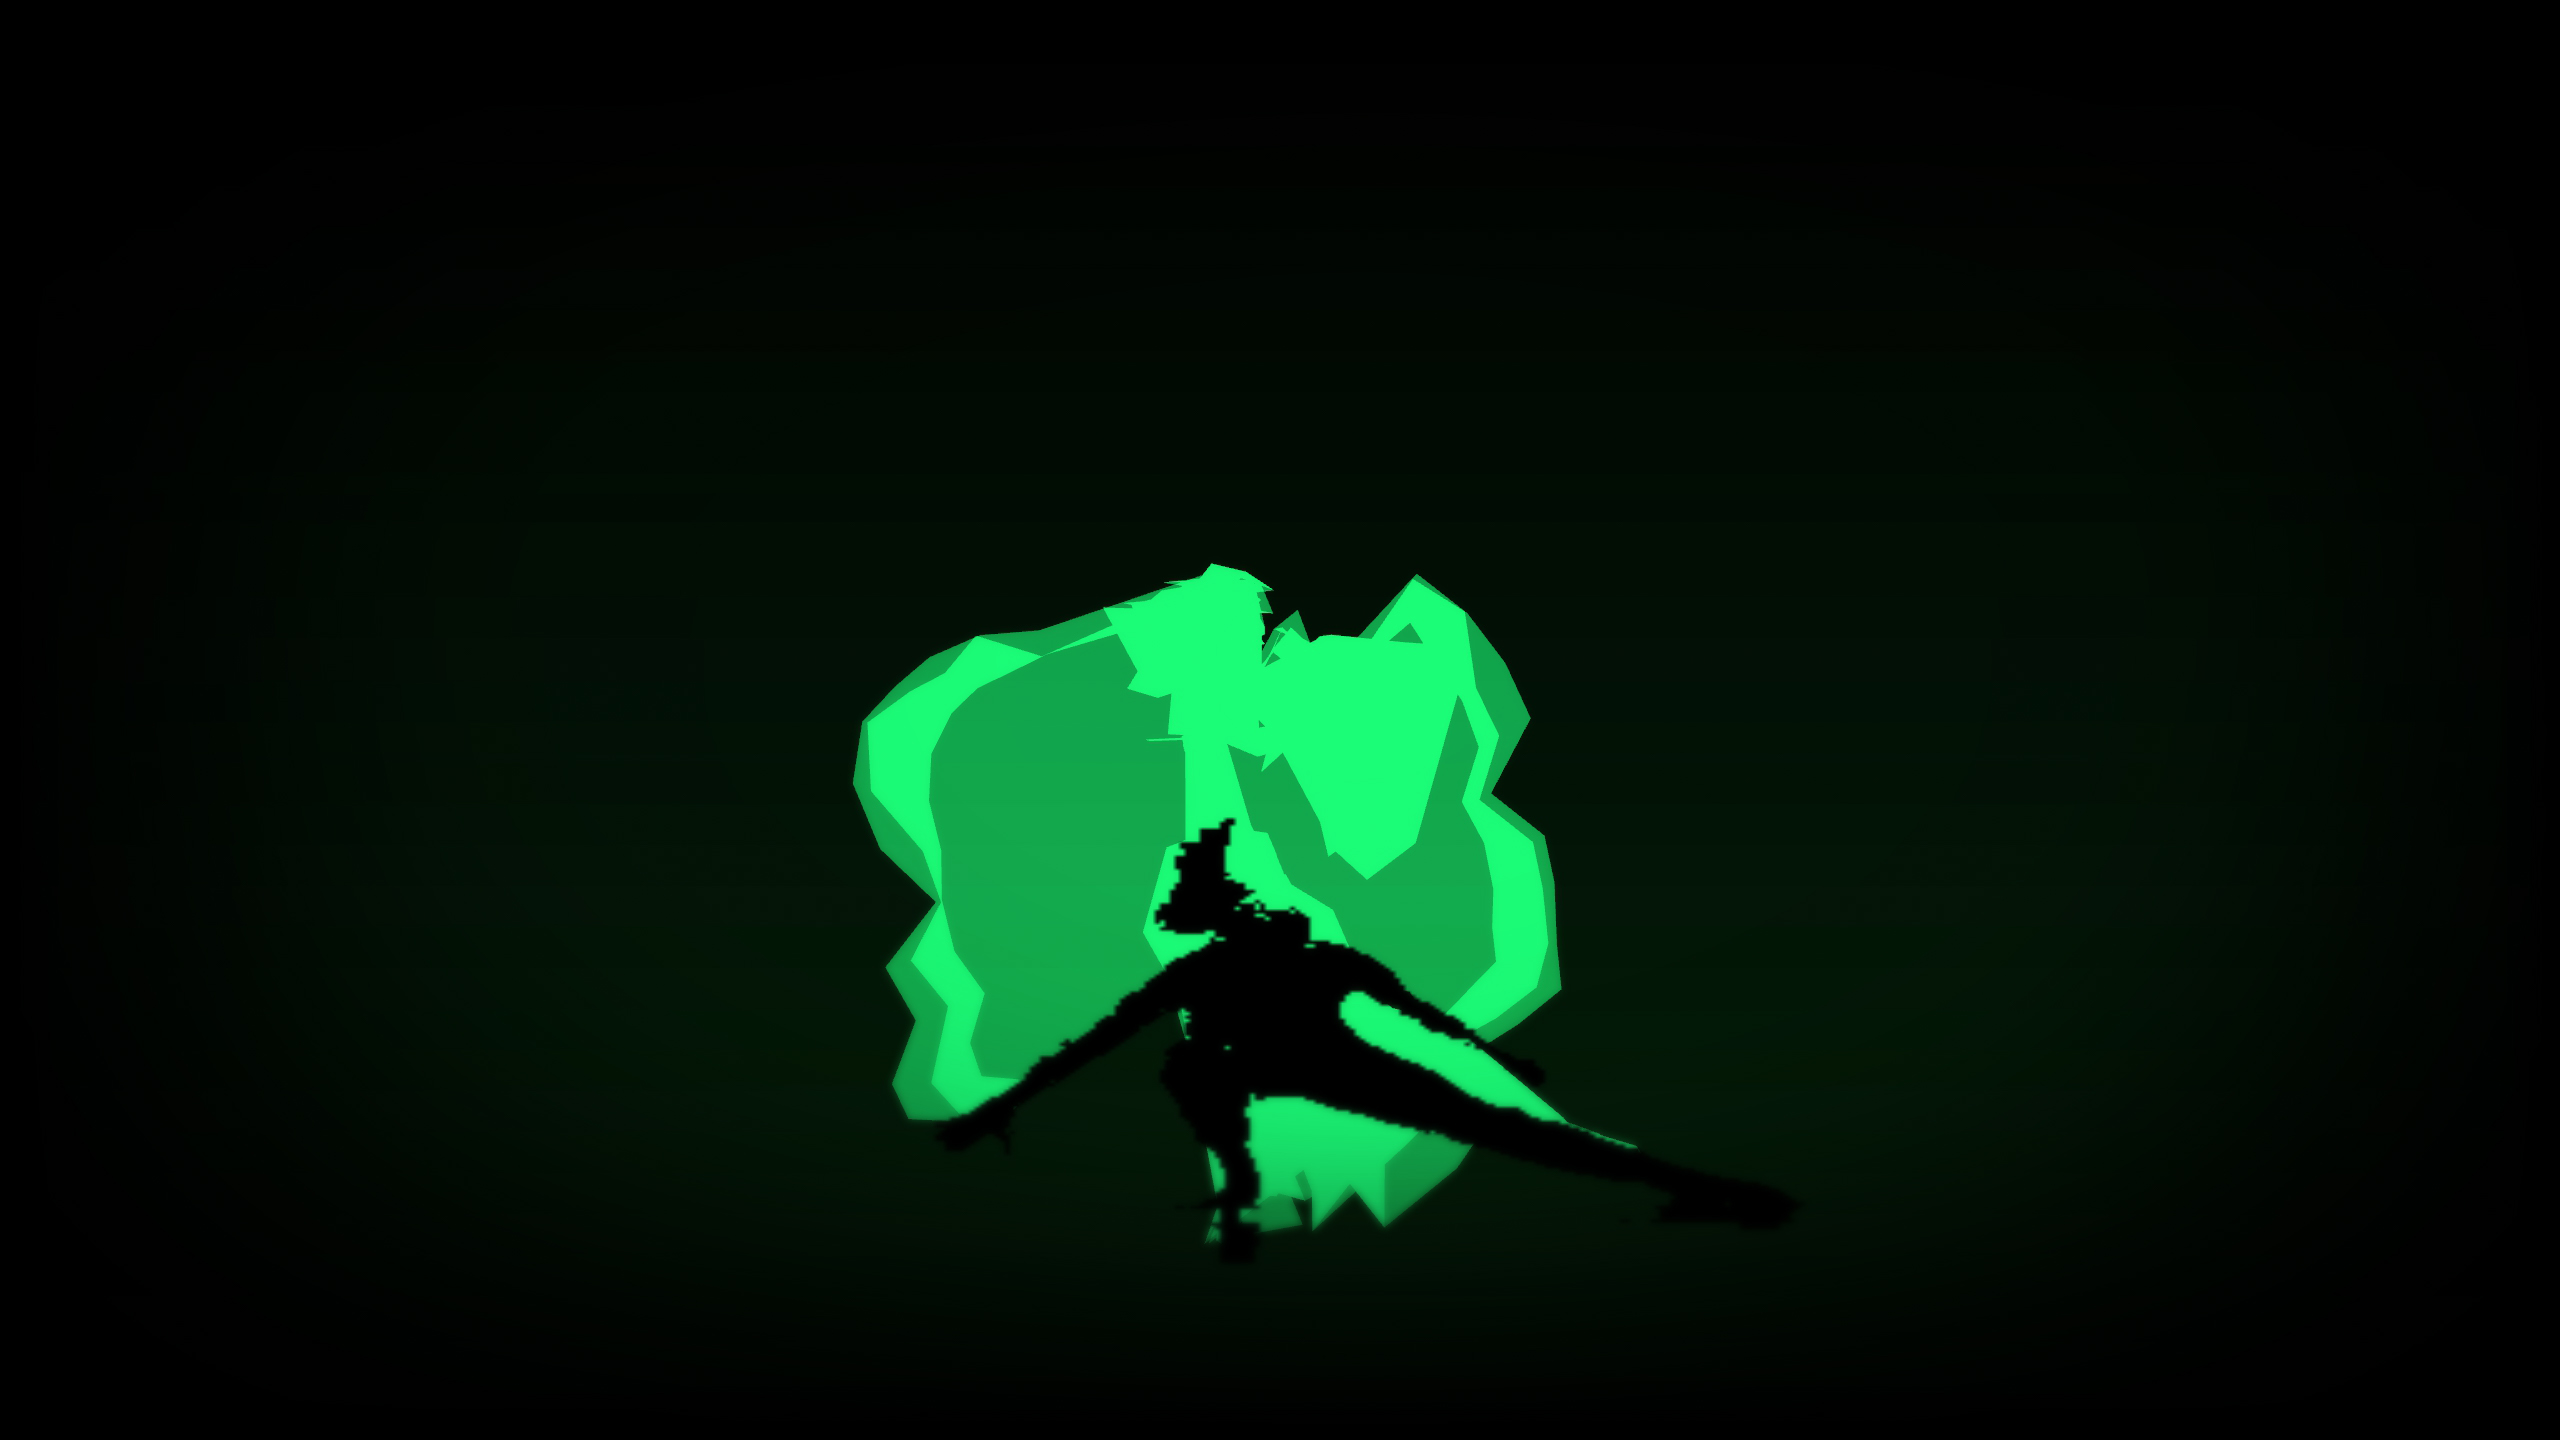 Screen grab of bright green polygonal trails on a black background as read from ESDC dancer movment.